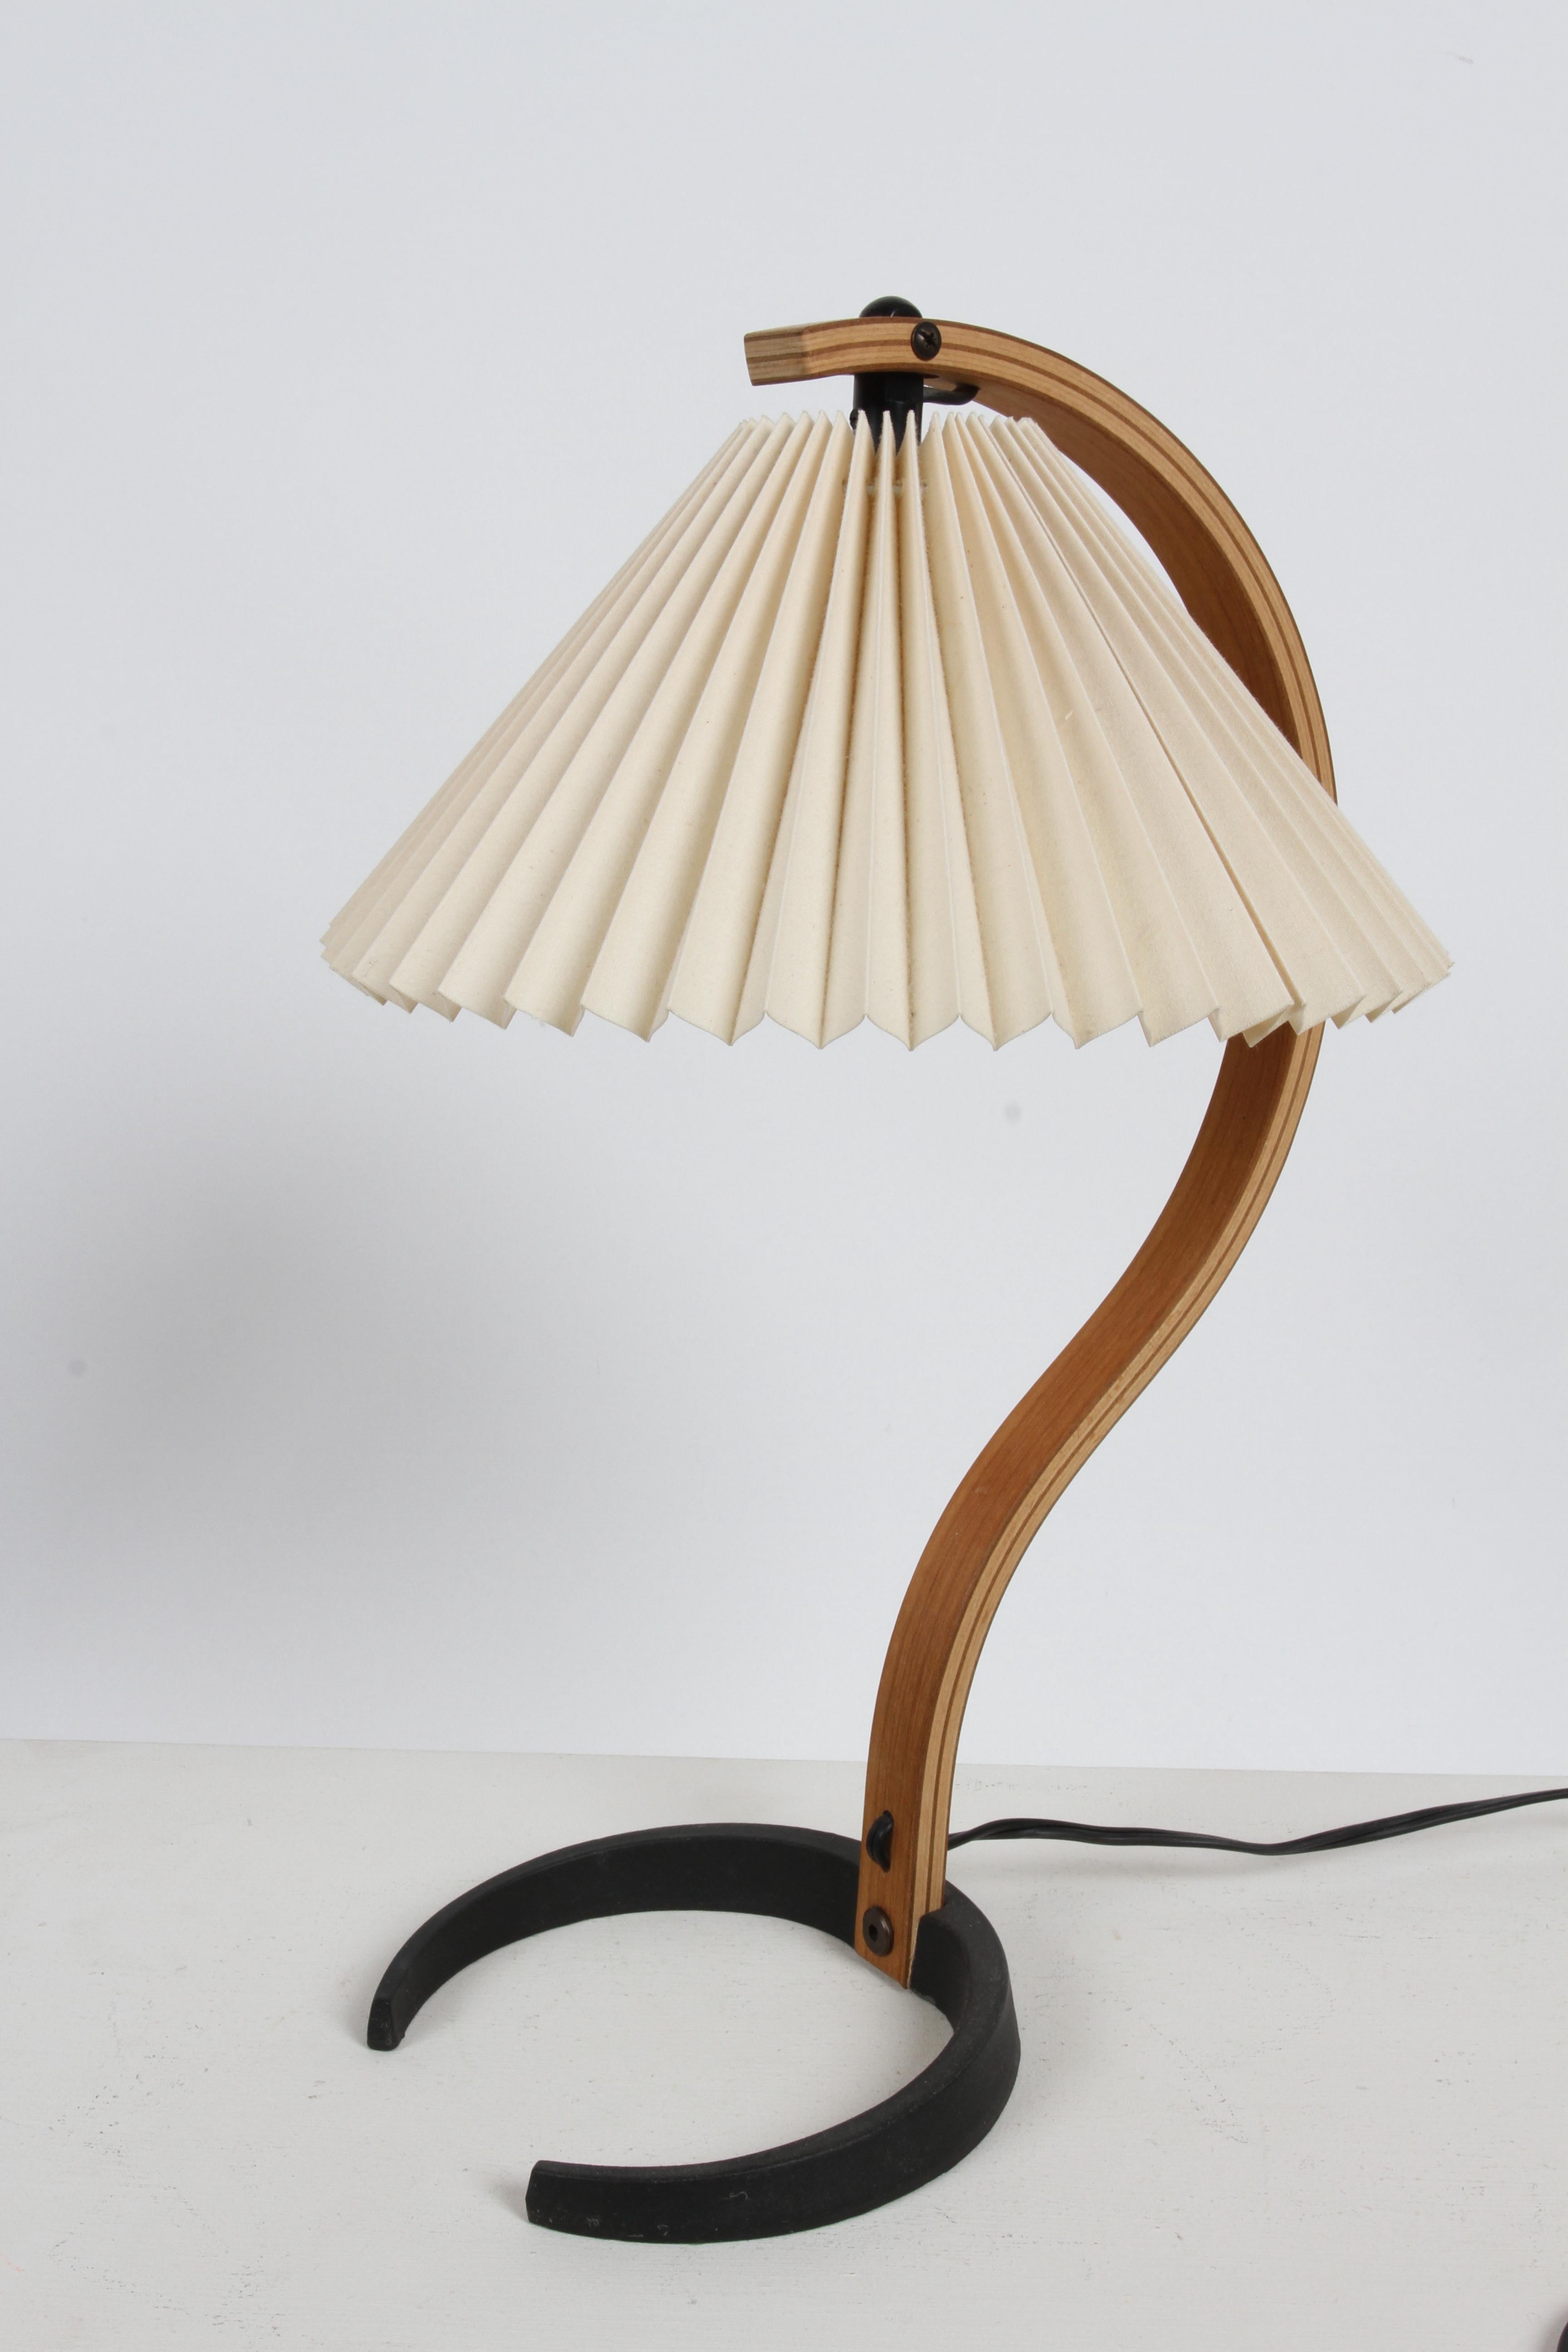 Pair of Mads - Caprani Denmark 1970s Timberline Bentwood Model 841 Table Lamps  For Sale 3